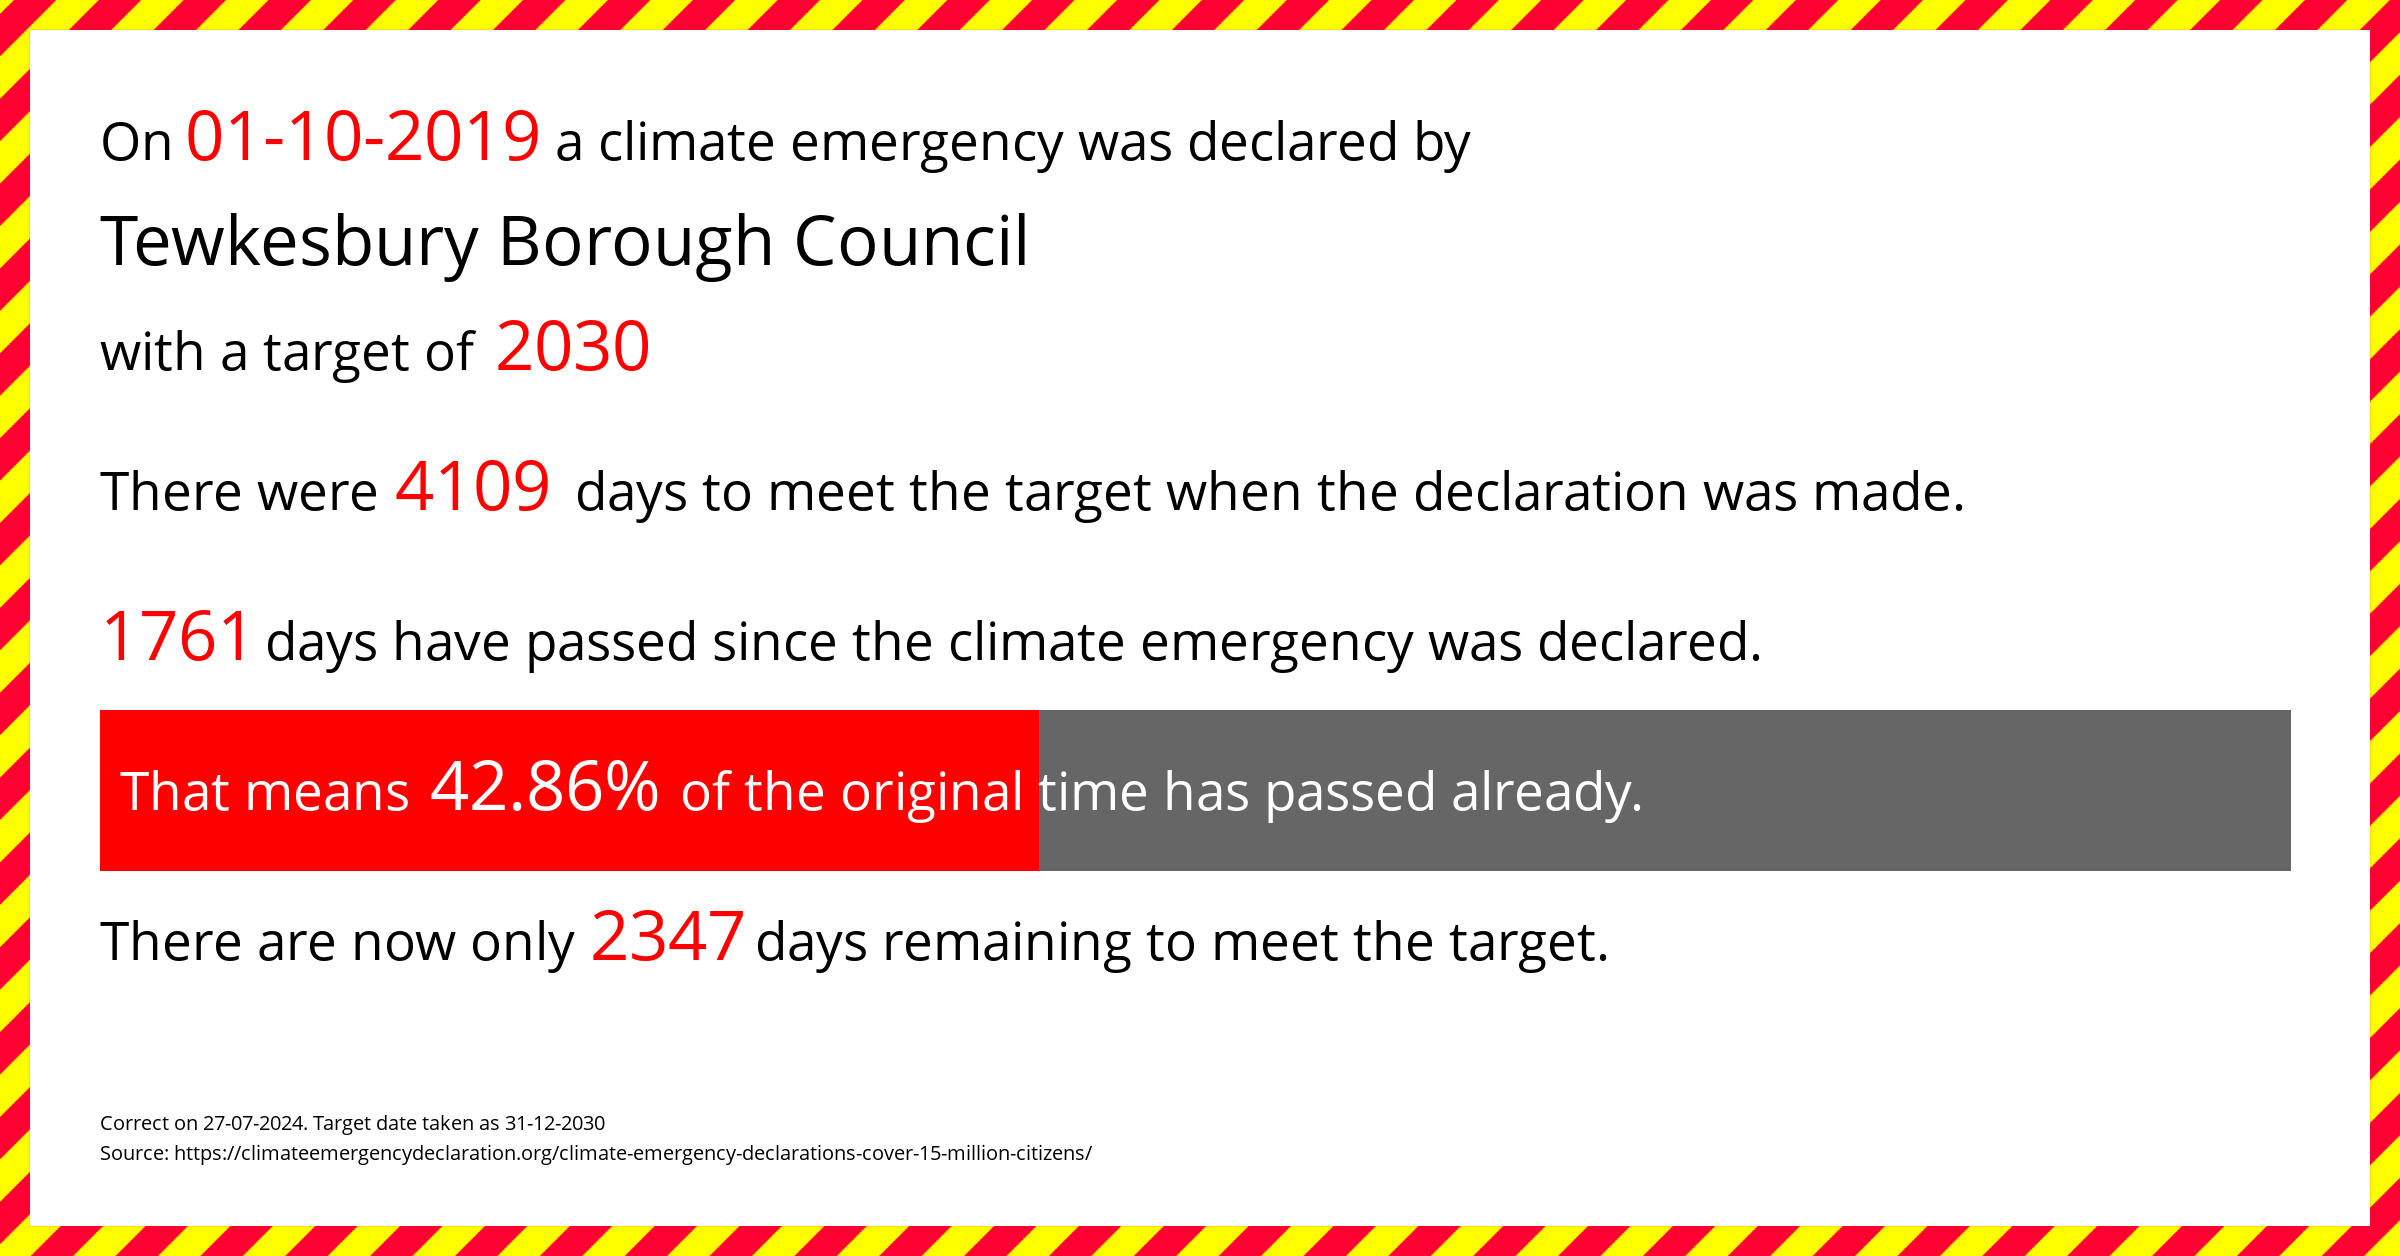 Tewkesbury Borough Council declared a Climate emergency on Tuesday 1st October 2019, with a target of 2030.